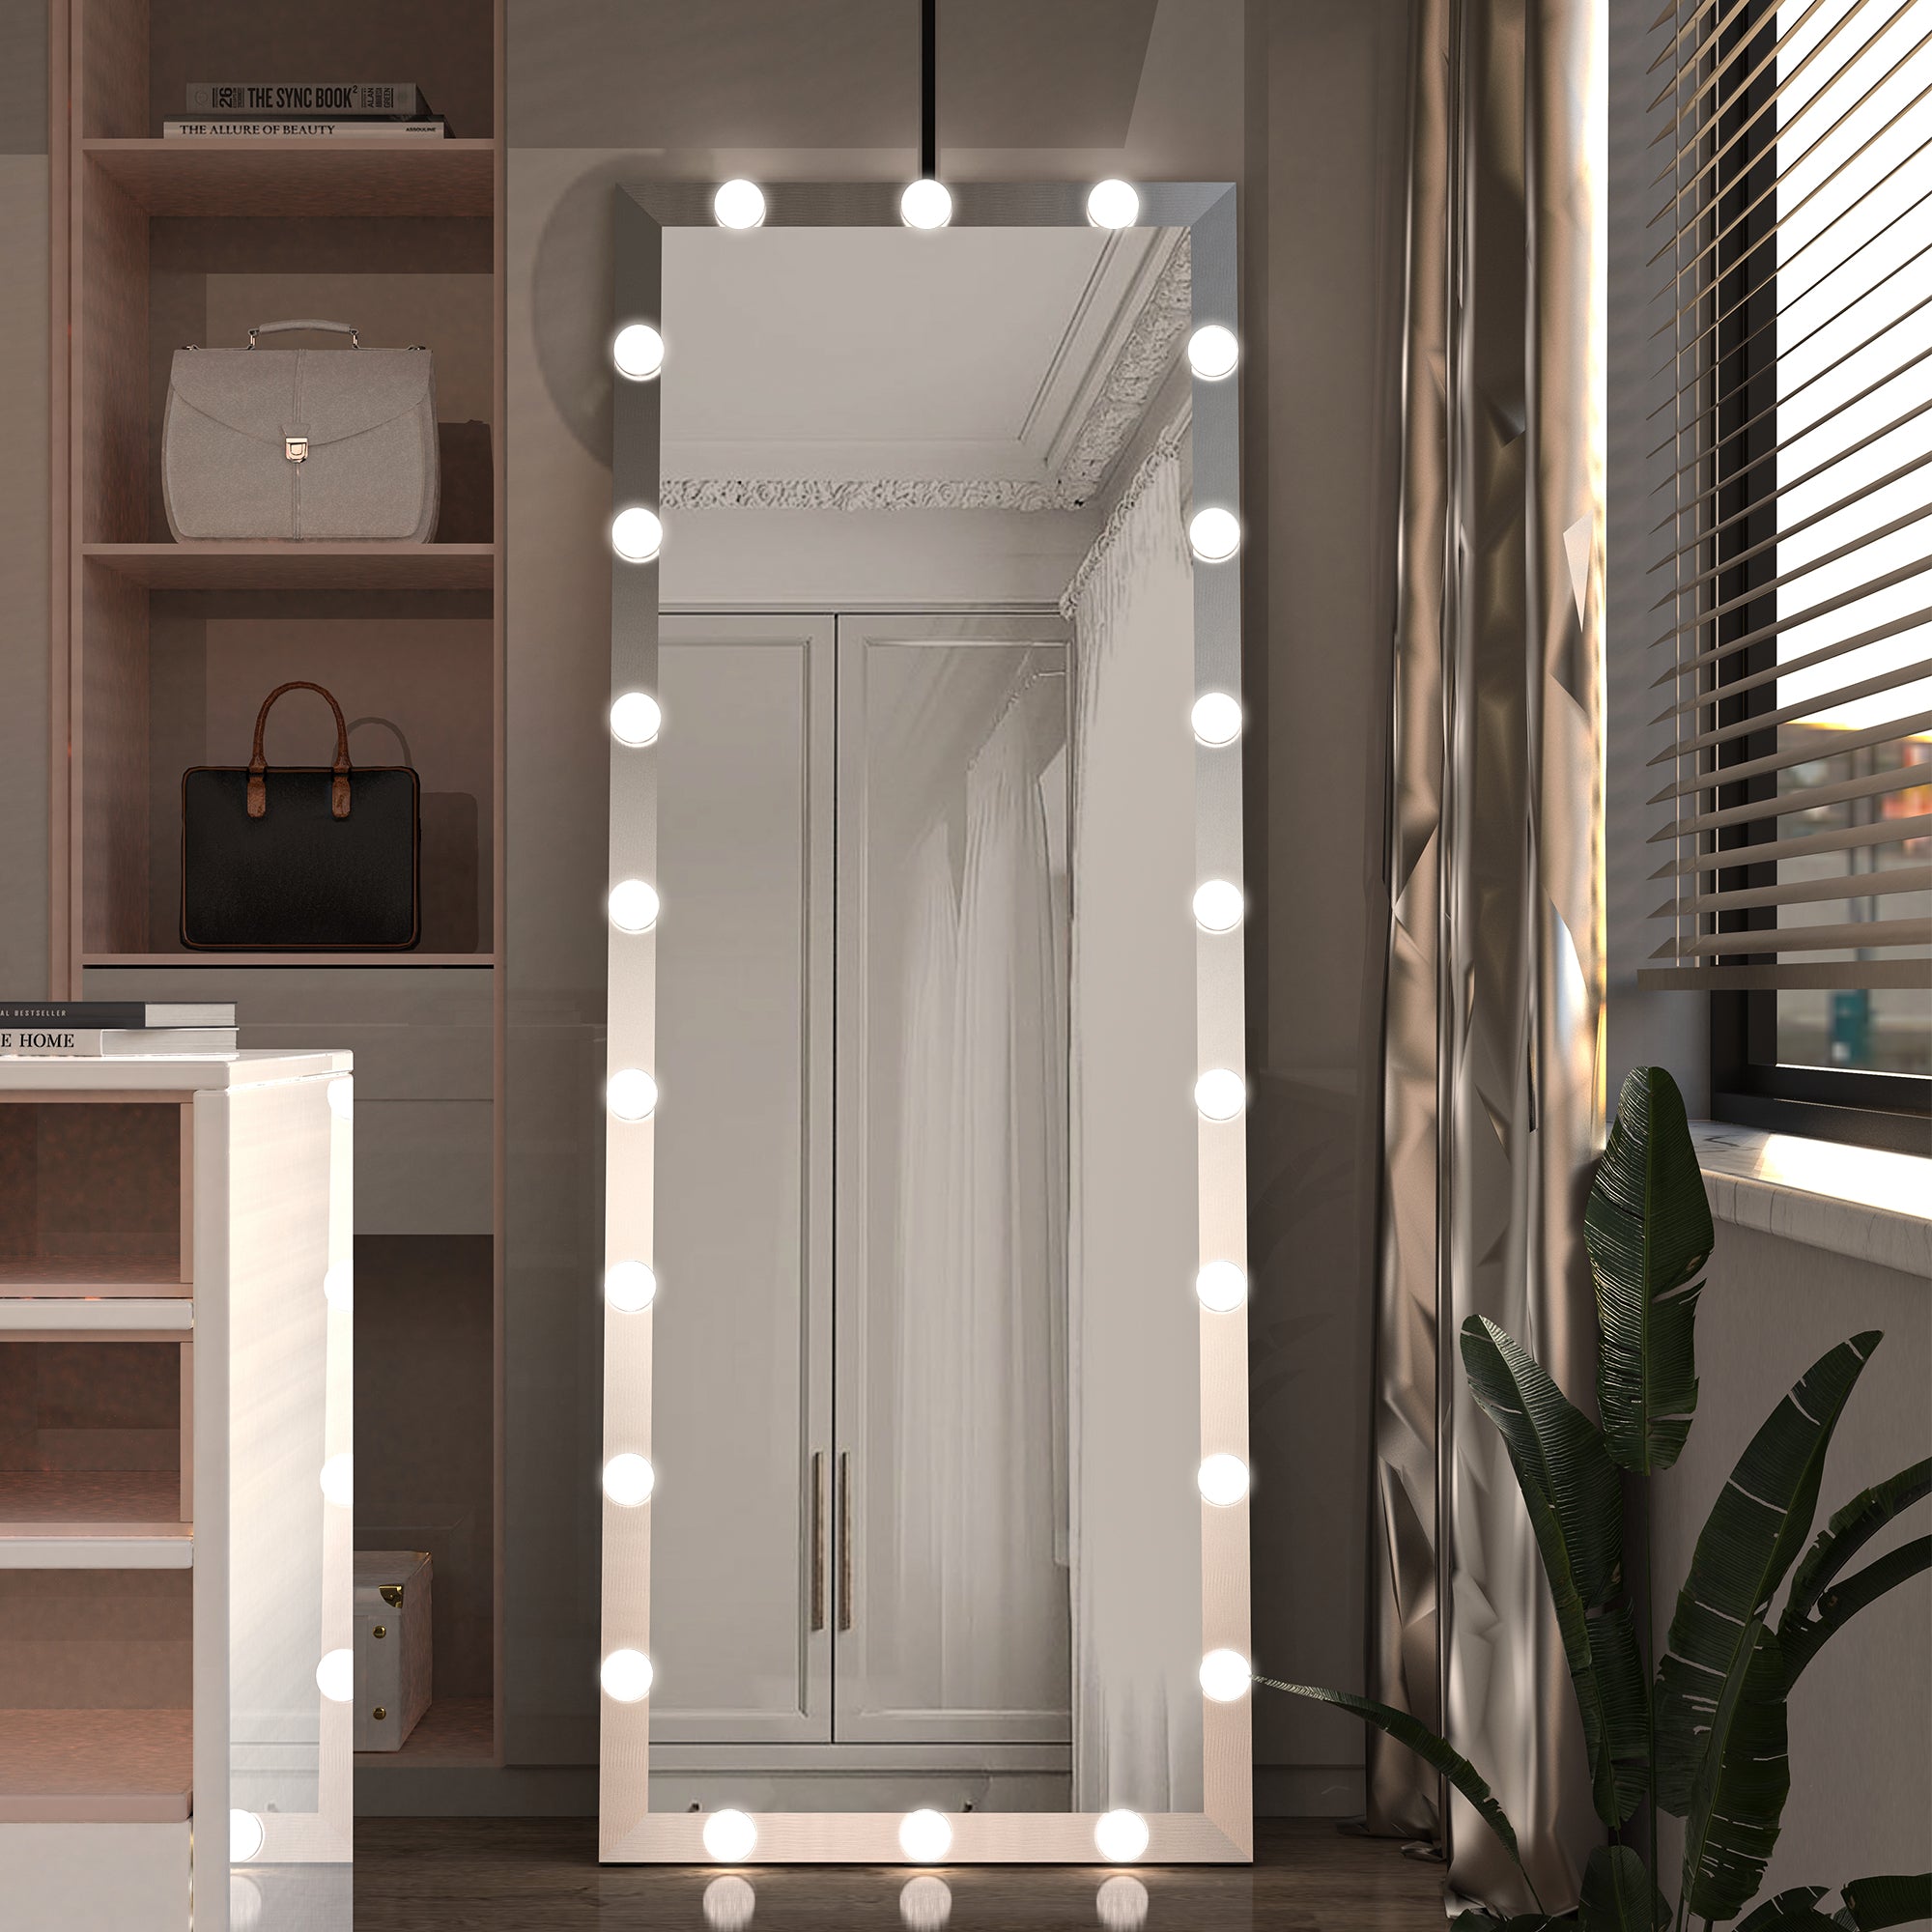 Hollywood Full Length Mirror with Lights Full Body Vanity Mirror with 3 Color Modes Lighted Standing Floor Mirror for Dressing Room Bedroom Wall Mounted Touch Control Silver 63"x24"